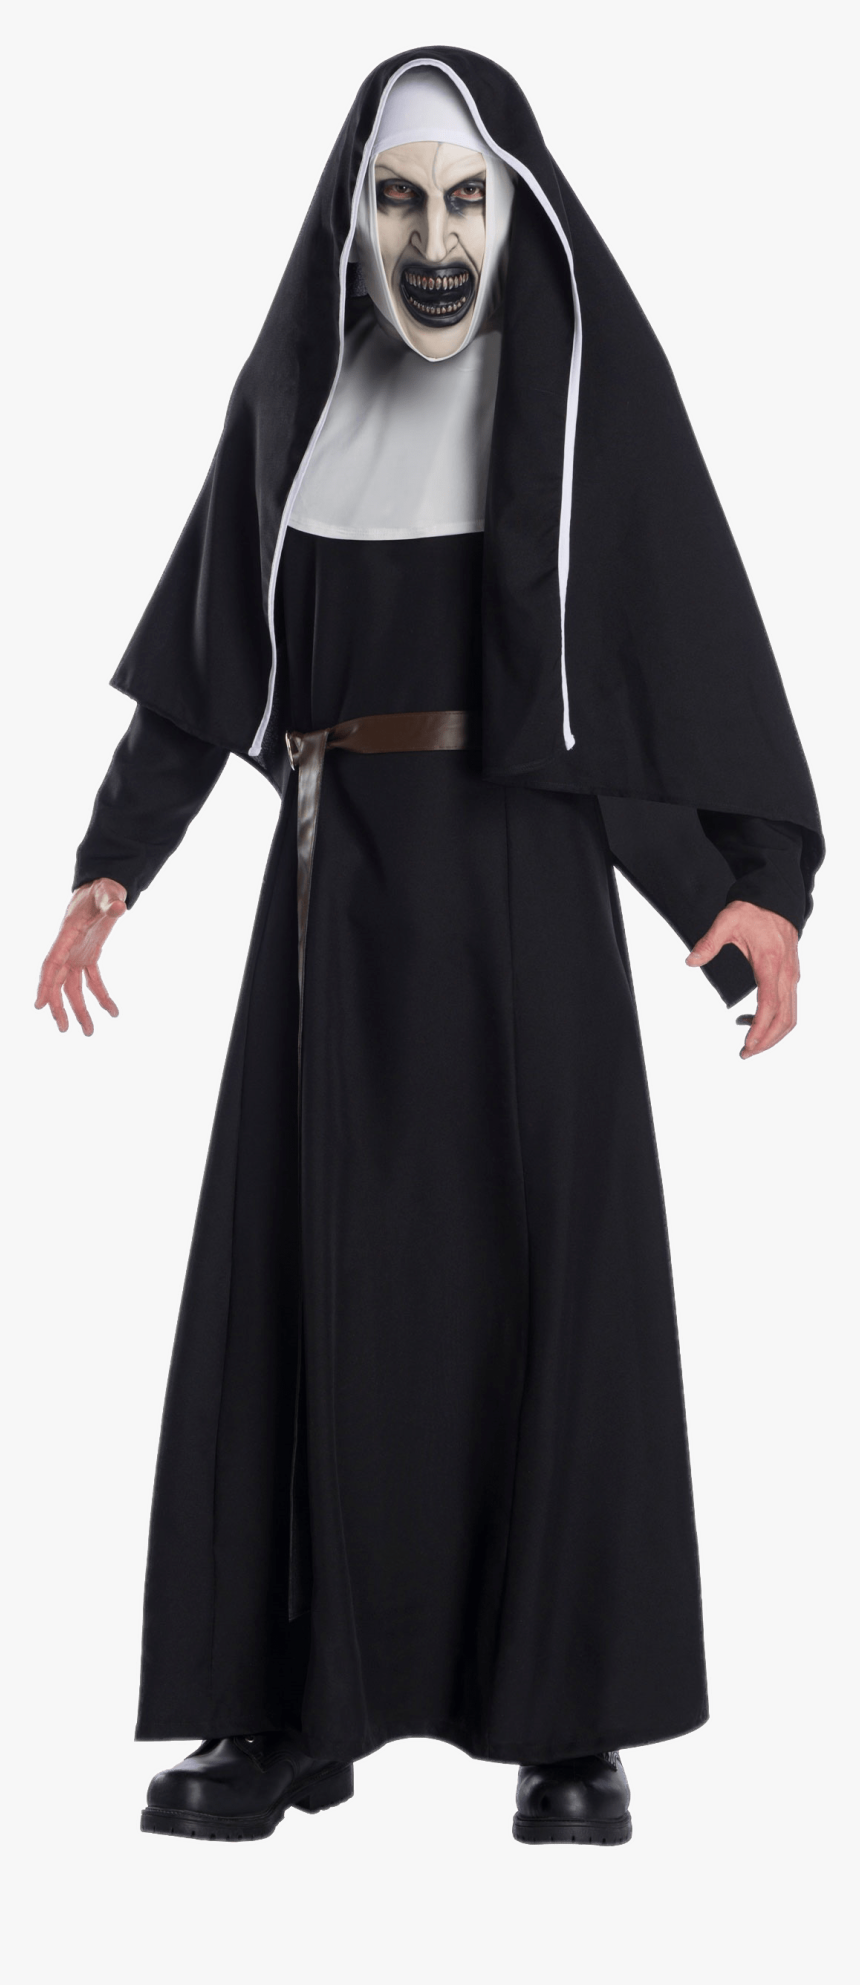 The Nun Costume - Nun Costume, HD Png Download, Free Download